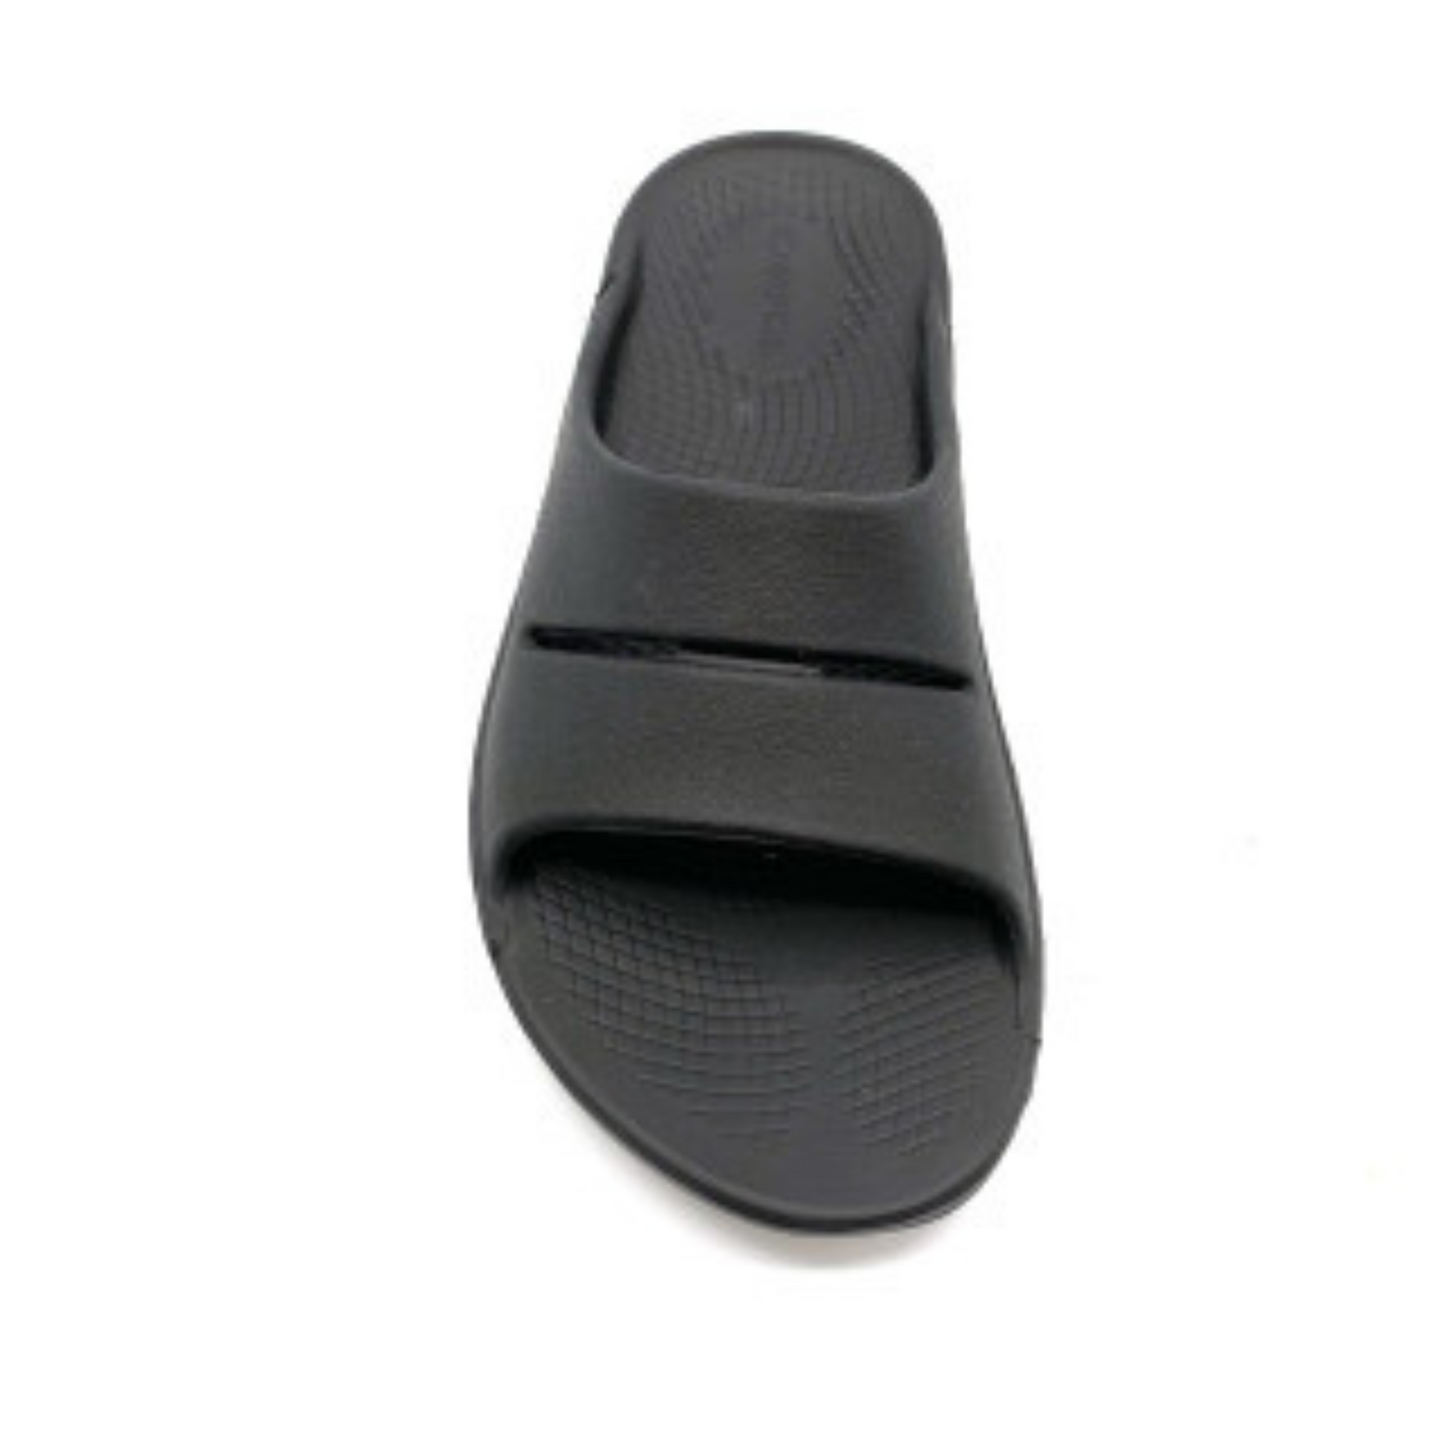 Front View of the slide showing the top straps and the insoles